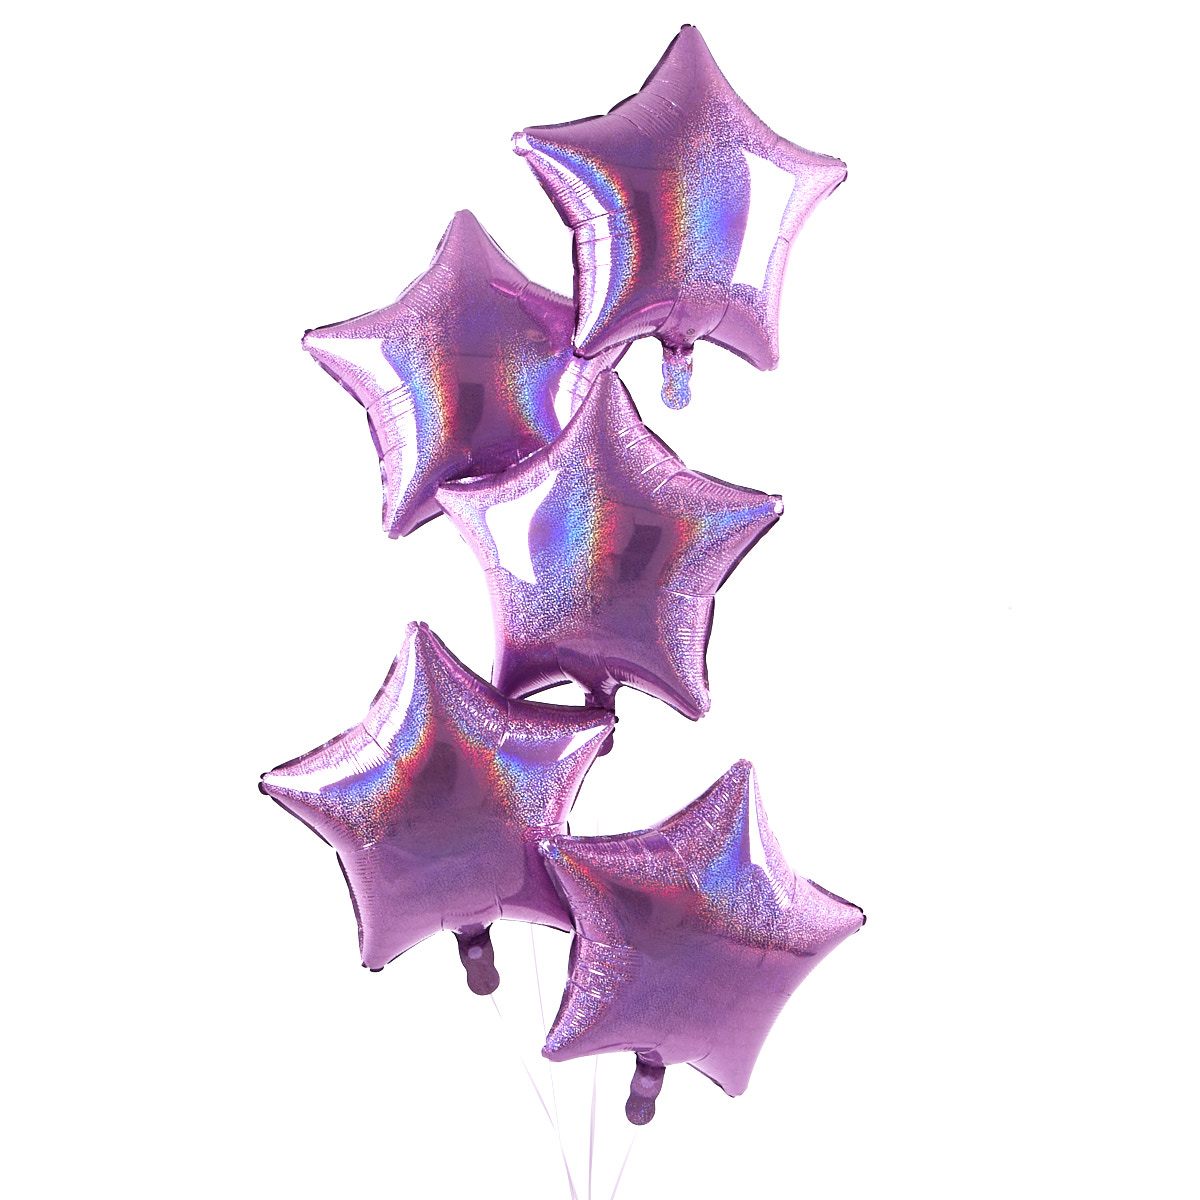 5 Baby Pink Stars Balloon Bouquet - DELIVERED INFLATED!